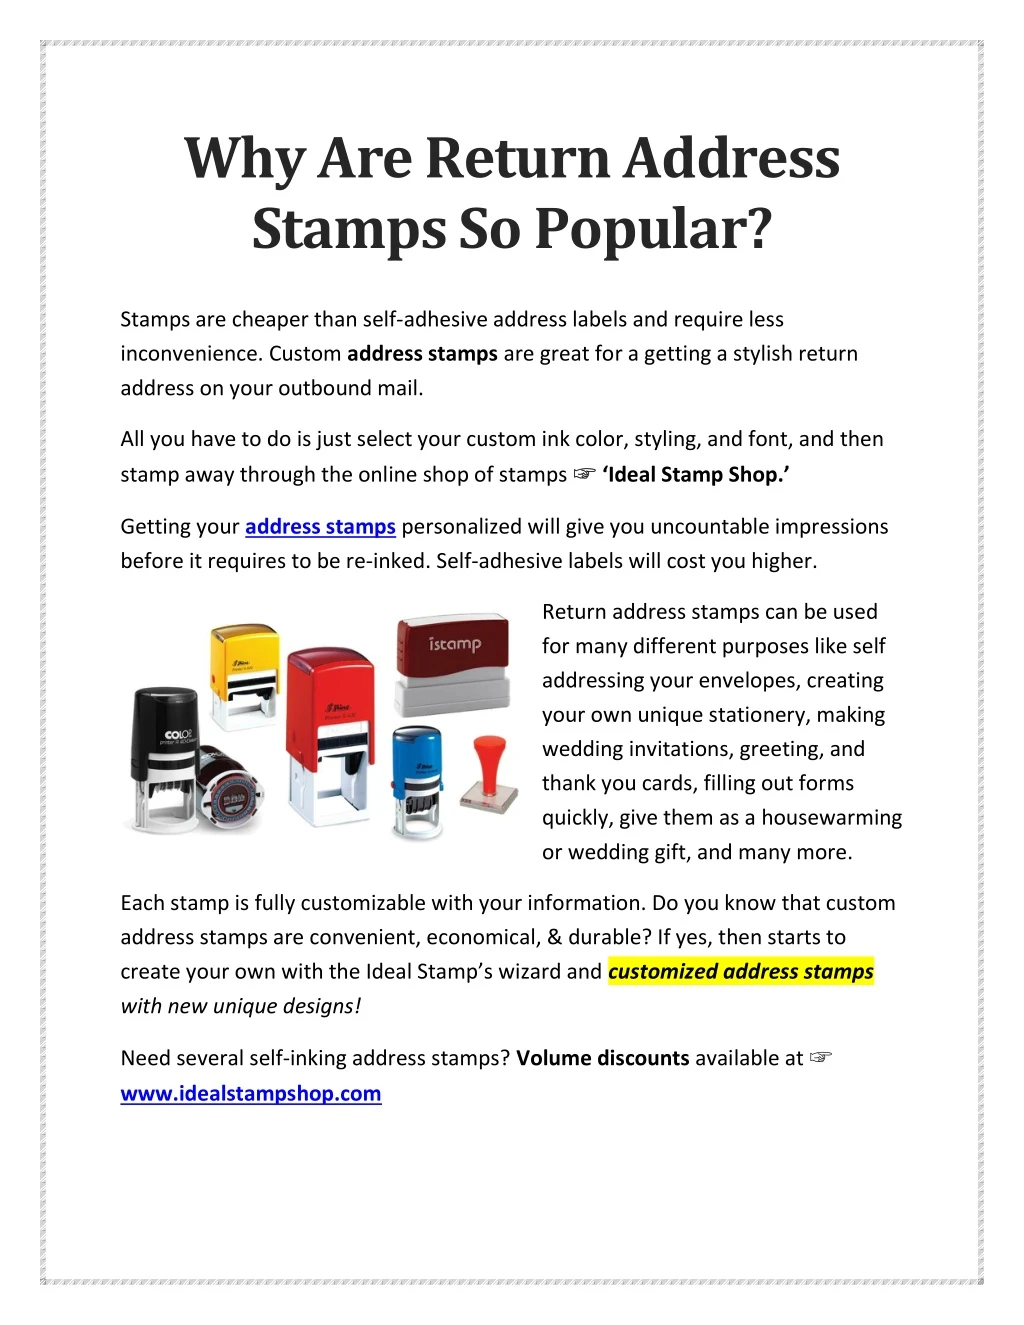 why are return address stamps so popular